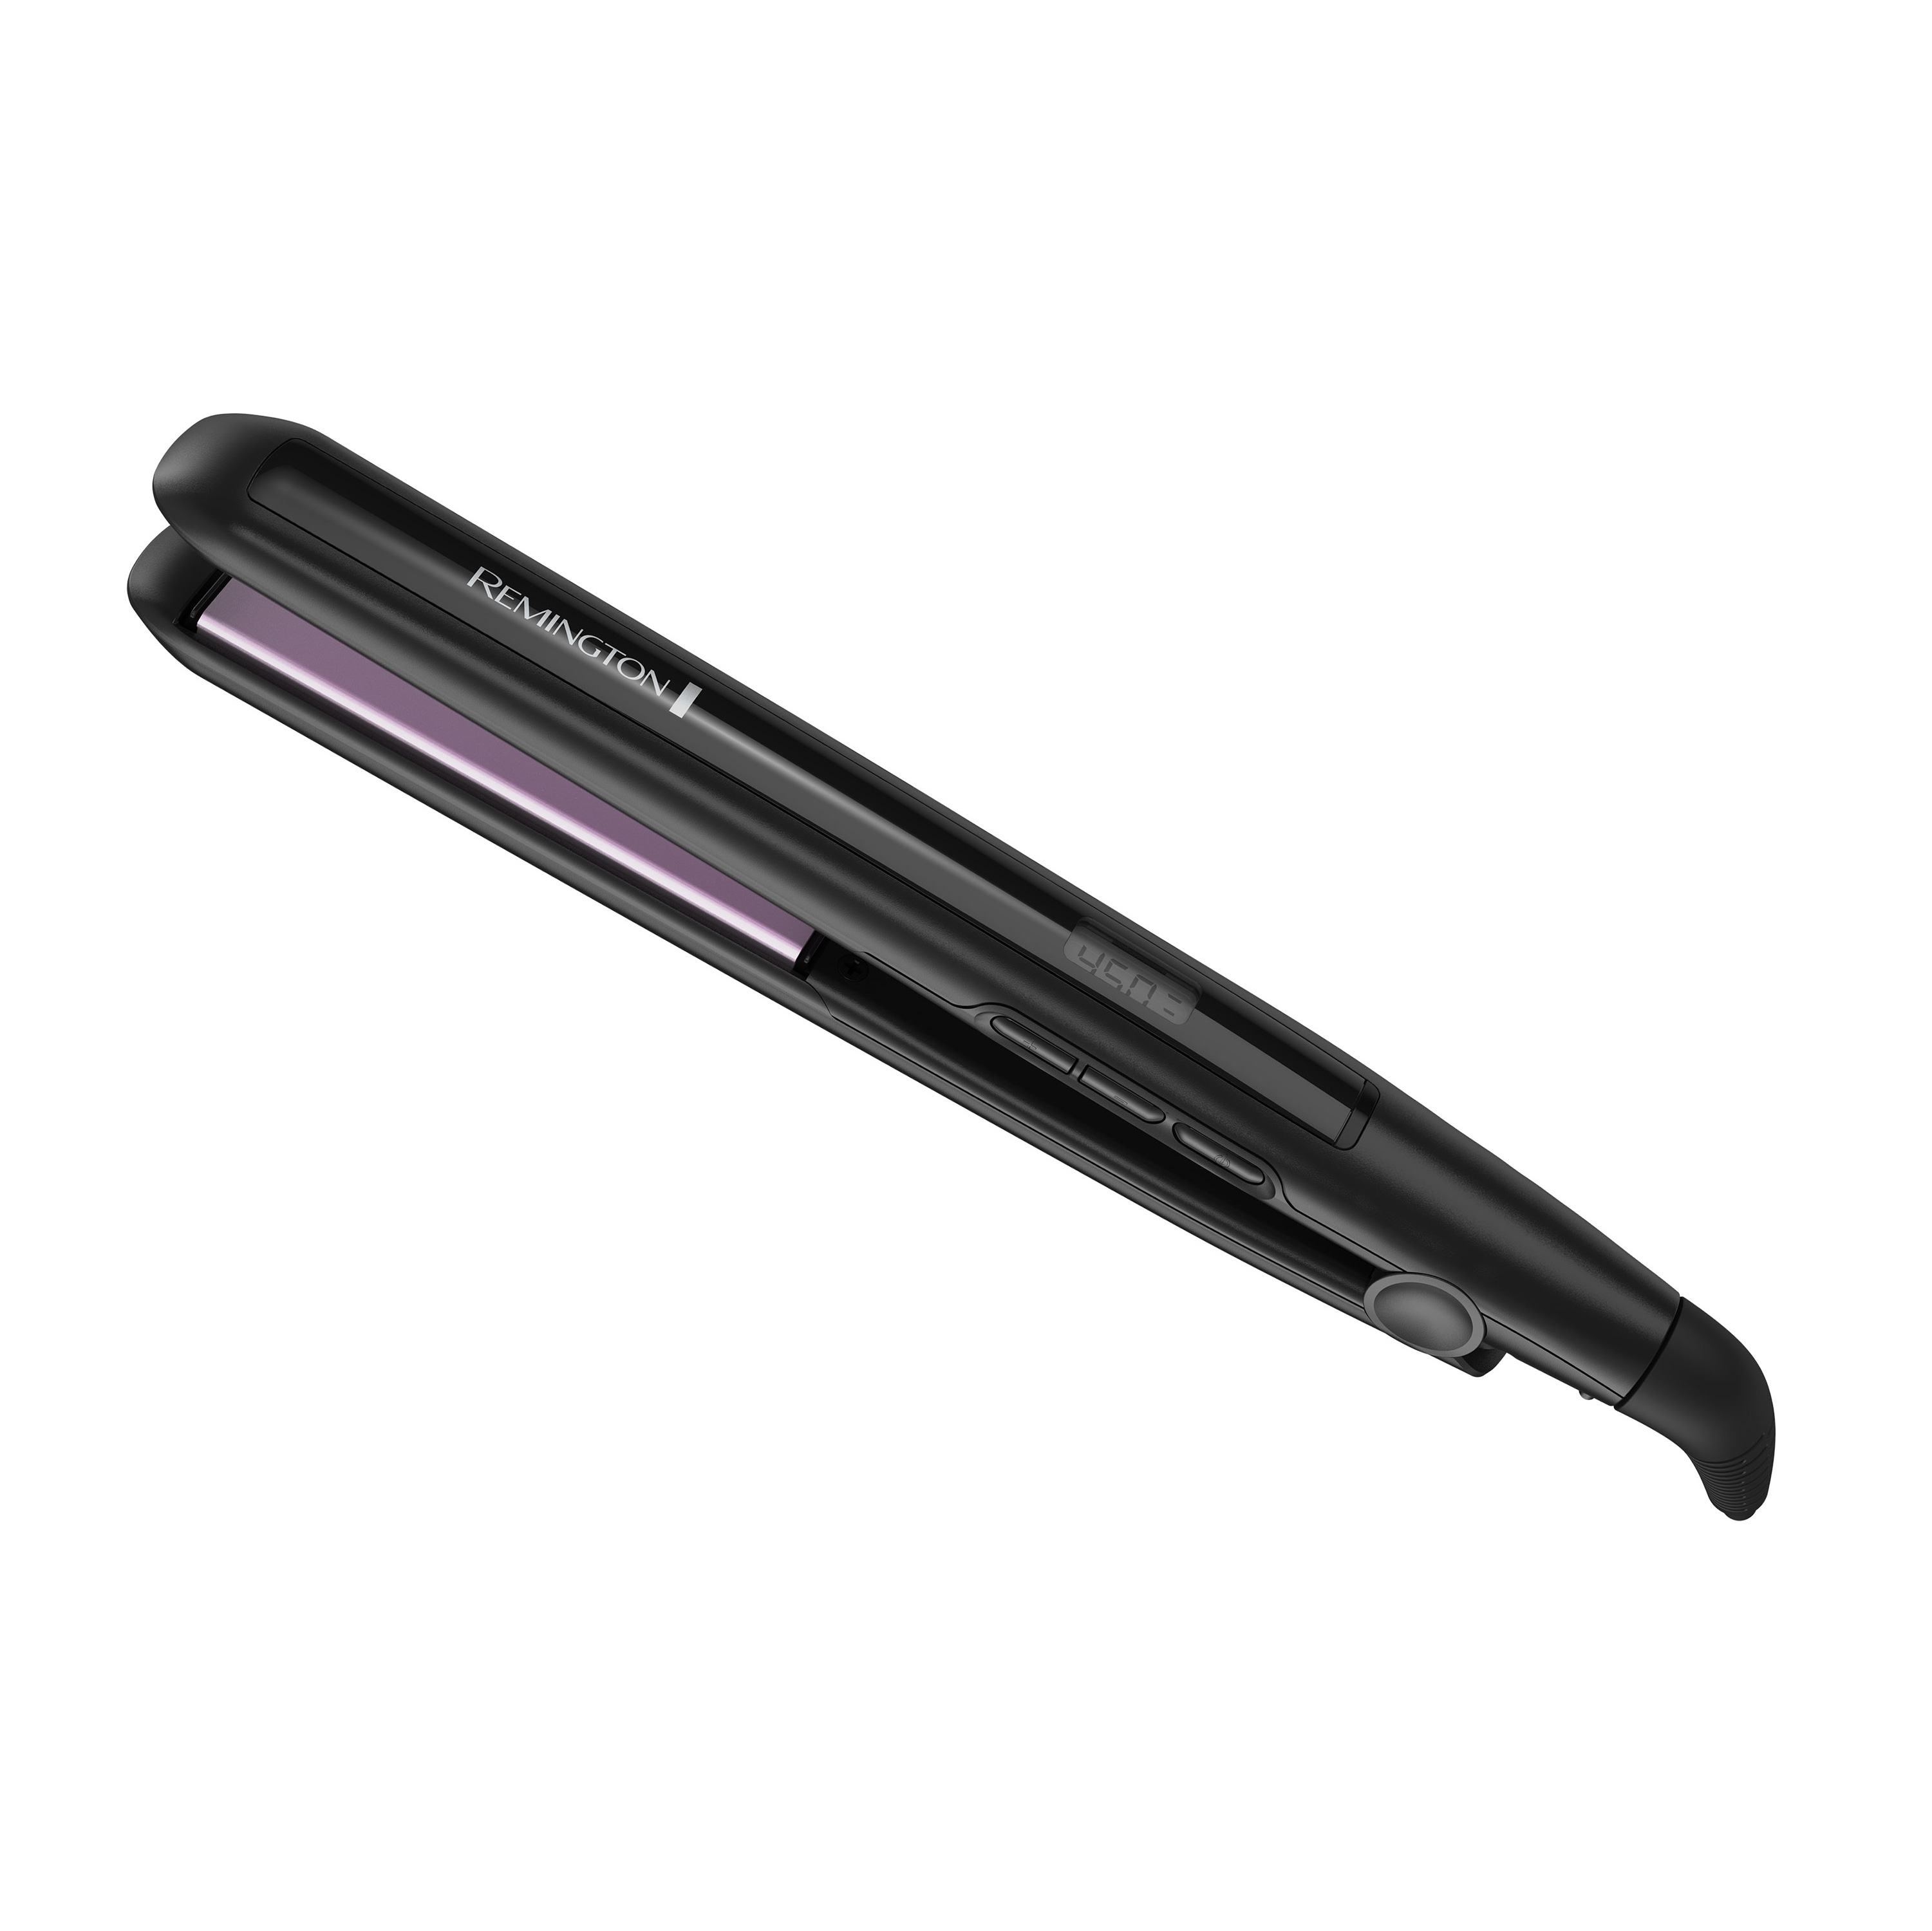 Remington 1" Anti-Static Flat Iron with Floating Ceramic Plates and Digital Controls, Hair Straightener, Black - image 1 of 8